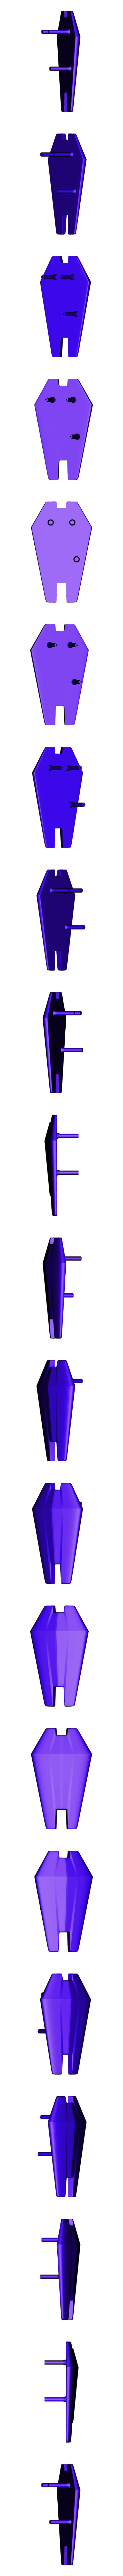 EscudoDer_fixed.stl Download free STL file HammerHead • Object to 3D print, BQ_3D